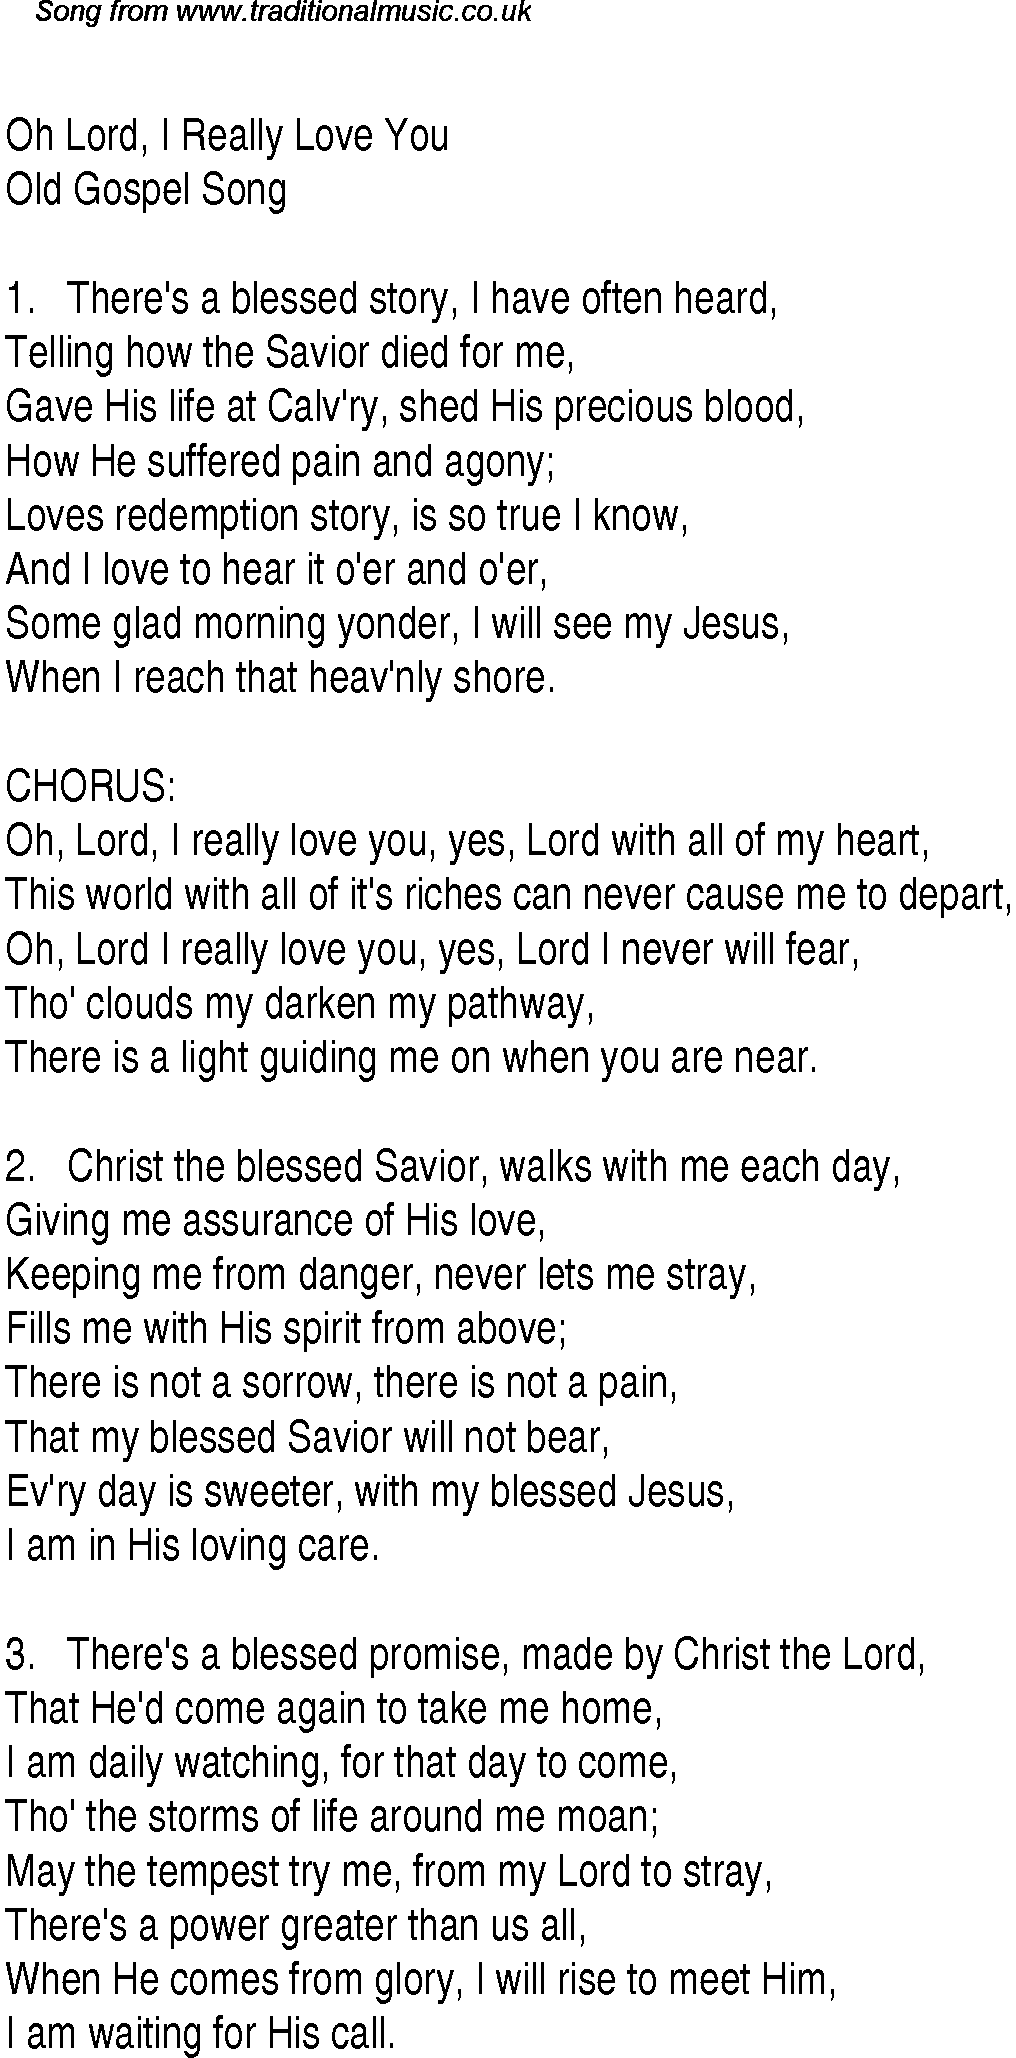 Gospel Song: oh-lord,-i-really-love-you, lyrics and chords.